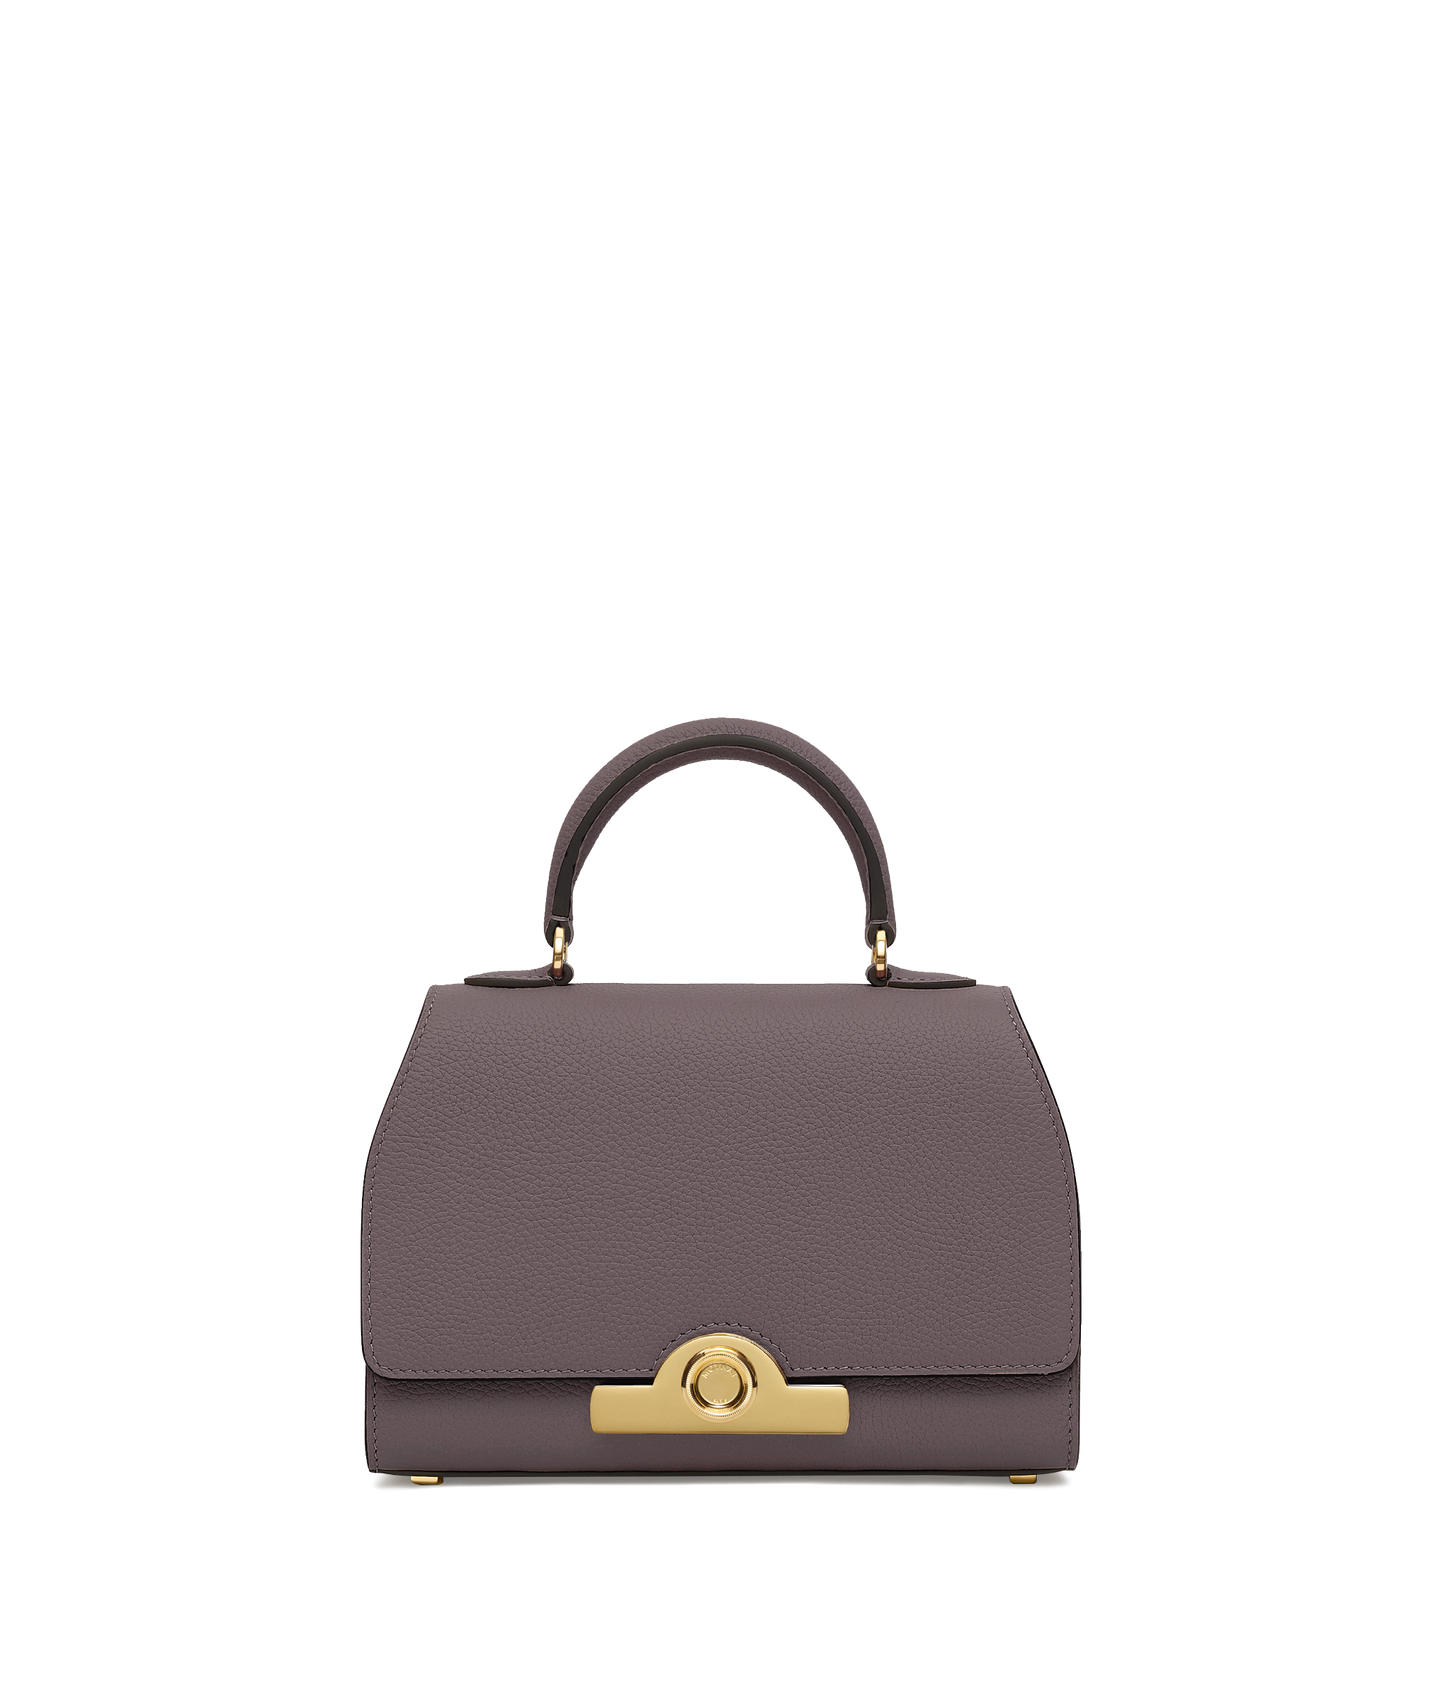 Moynat Bags - 58 products